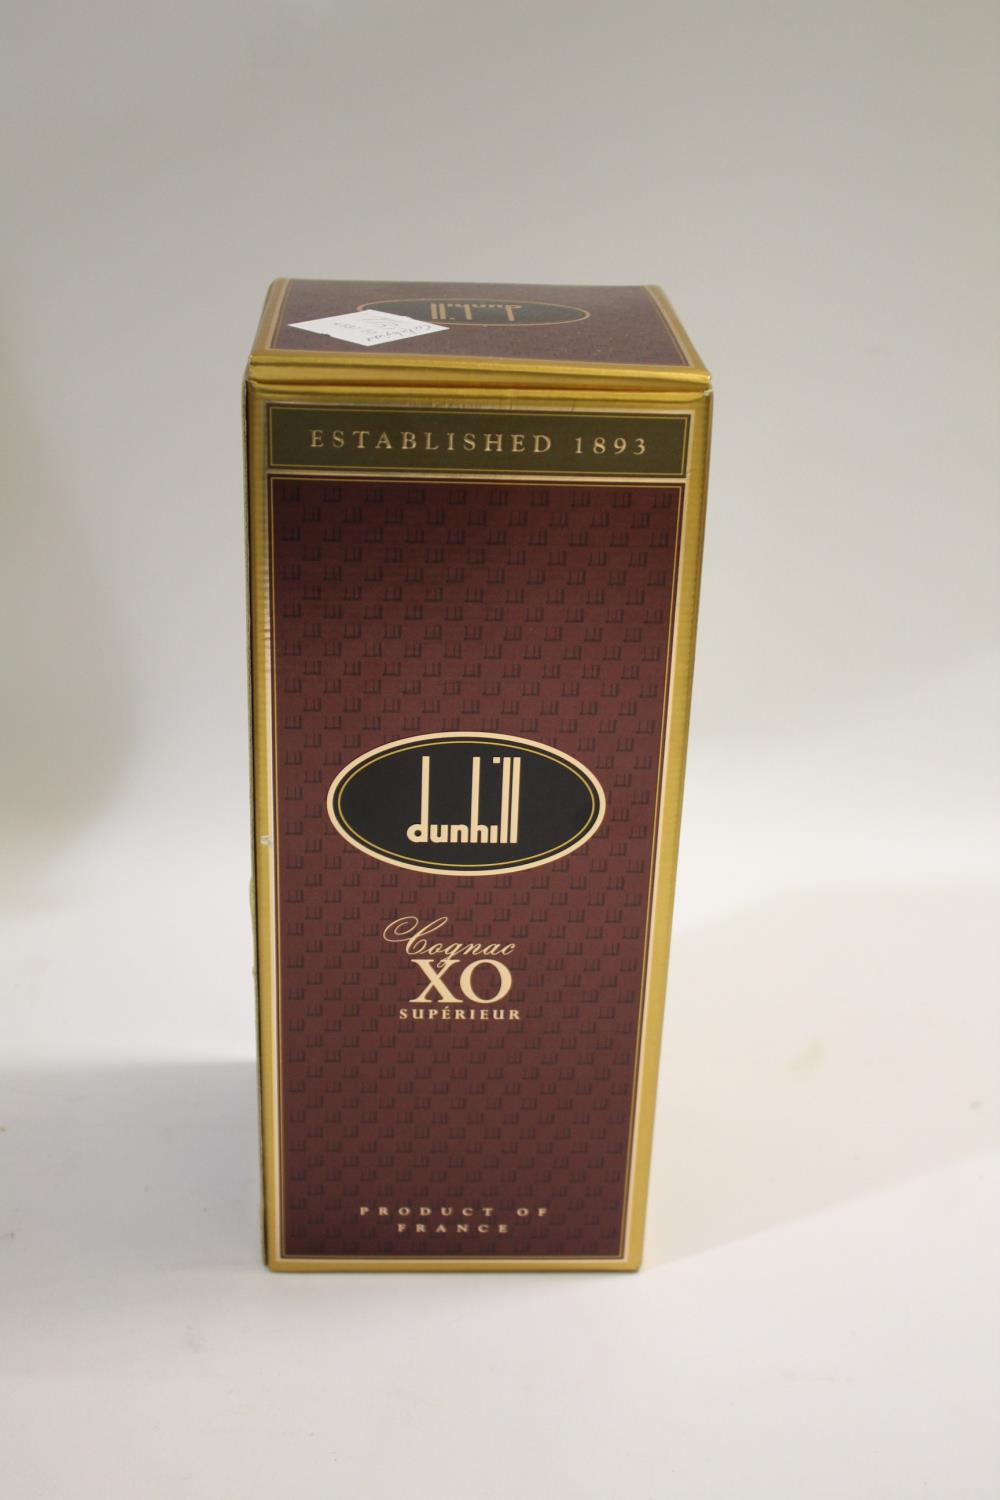 COGNAC: Dunhill XO Superieur, Bottle number 083840, in a faceted decanter and stopper, with original